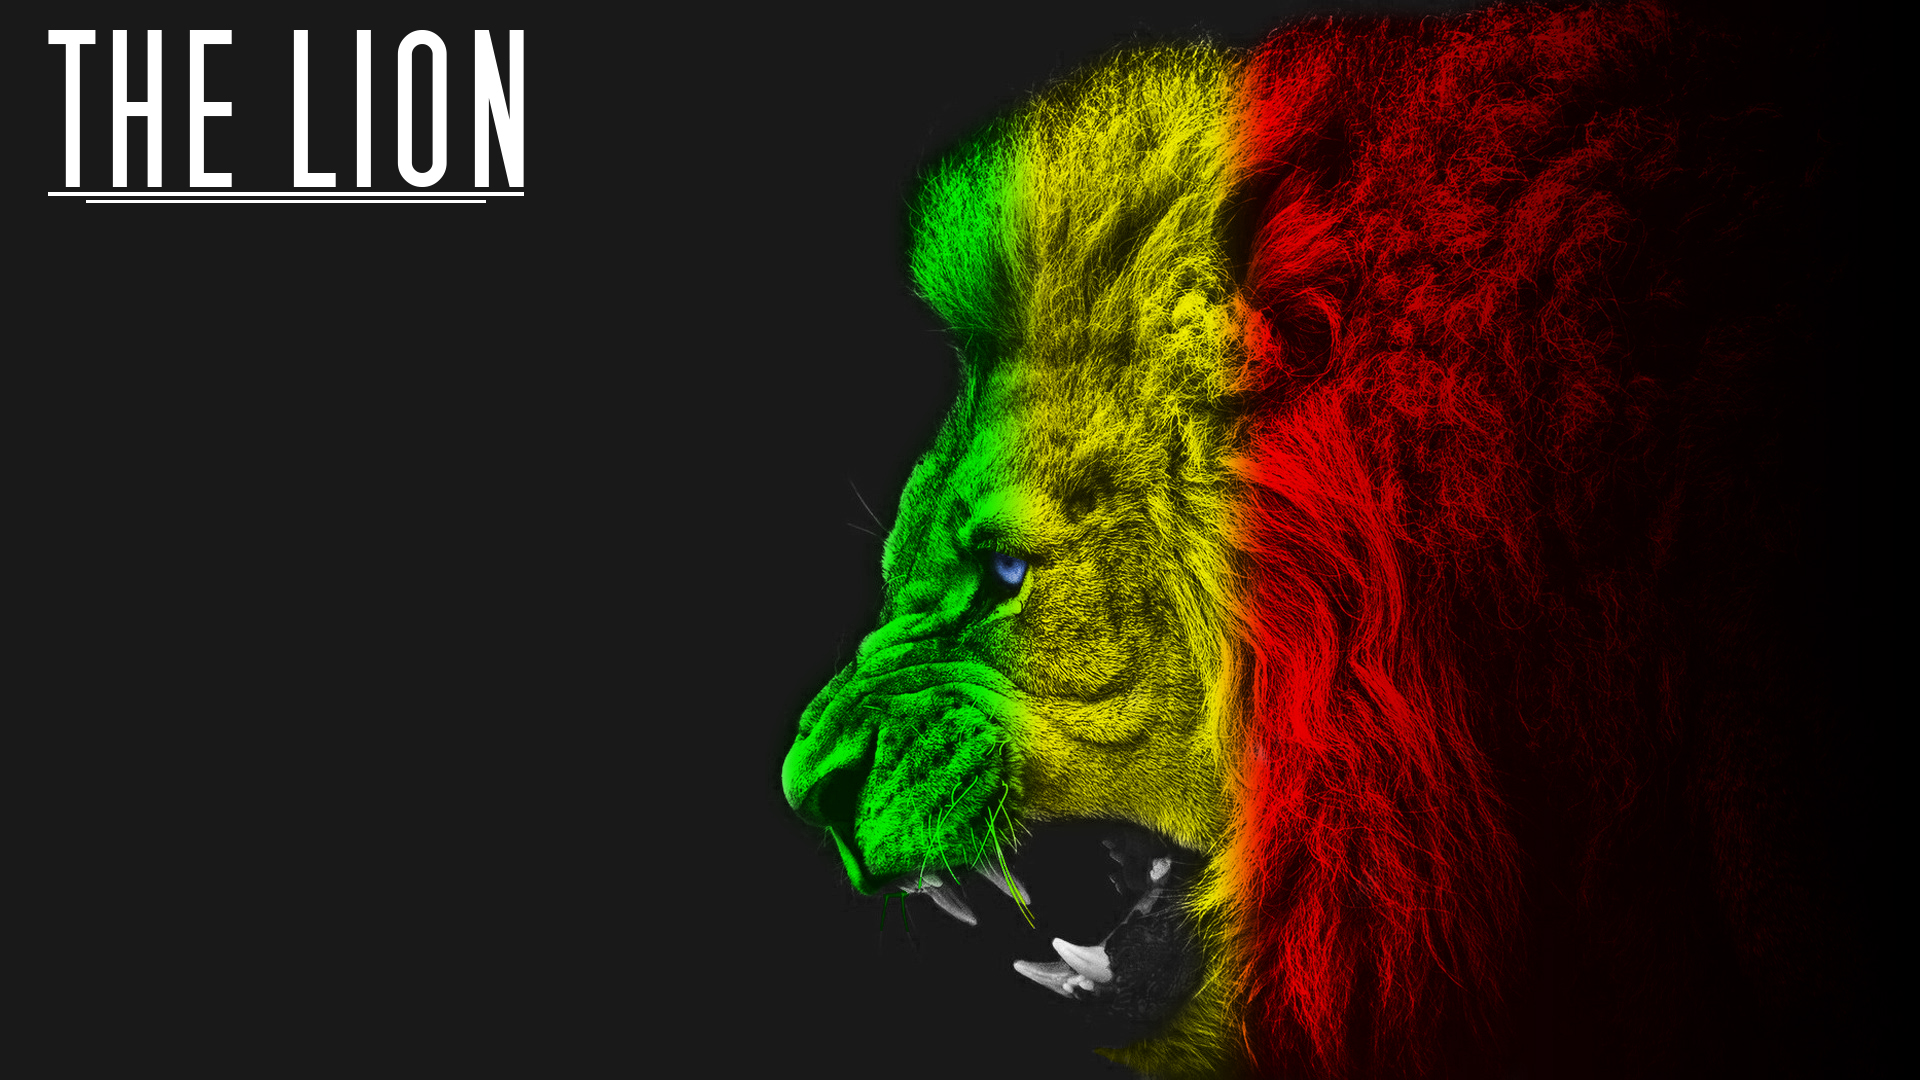 The Lion Wallpaper by Th3TwisteD on